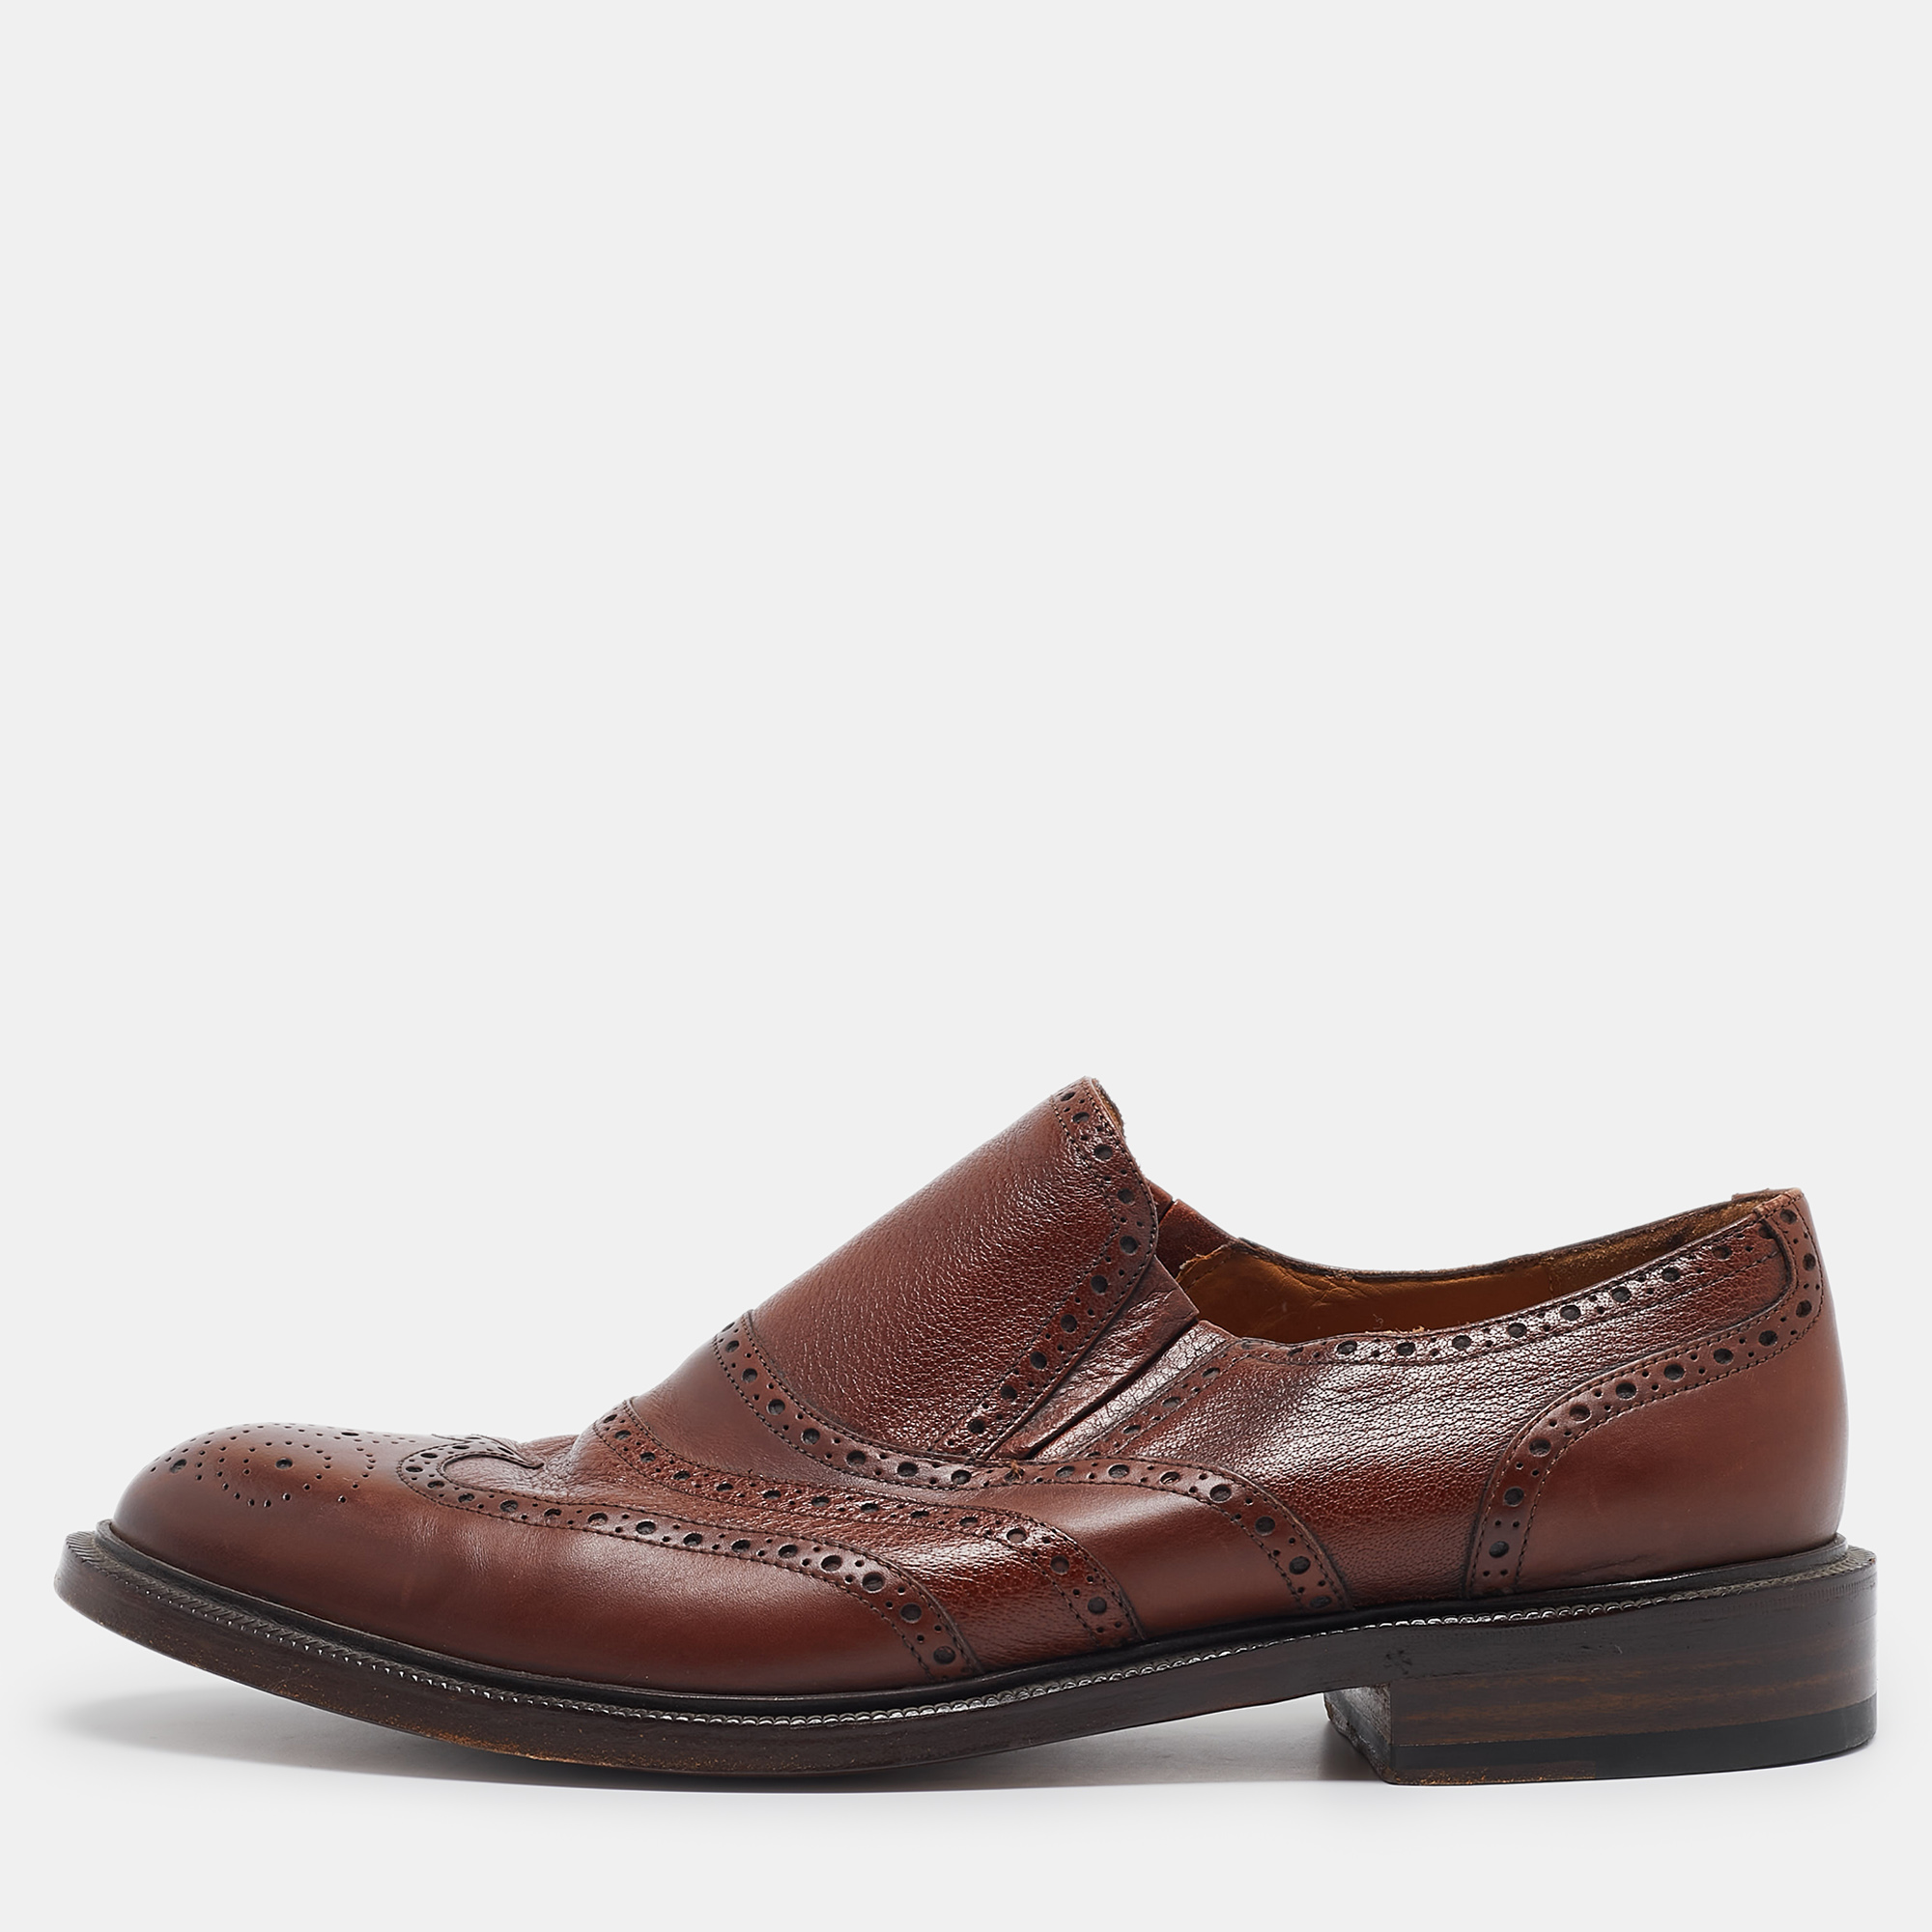 

Gucci Brown Brogue Leather Slip On Oxford Size